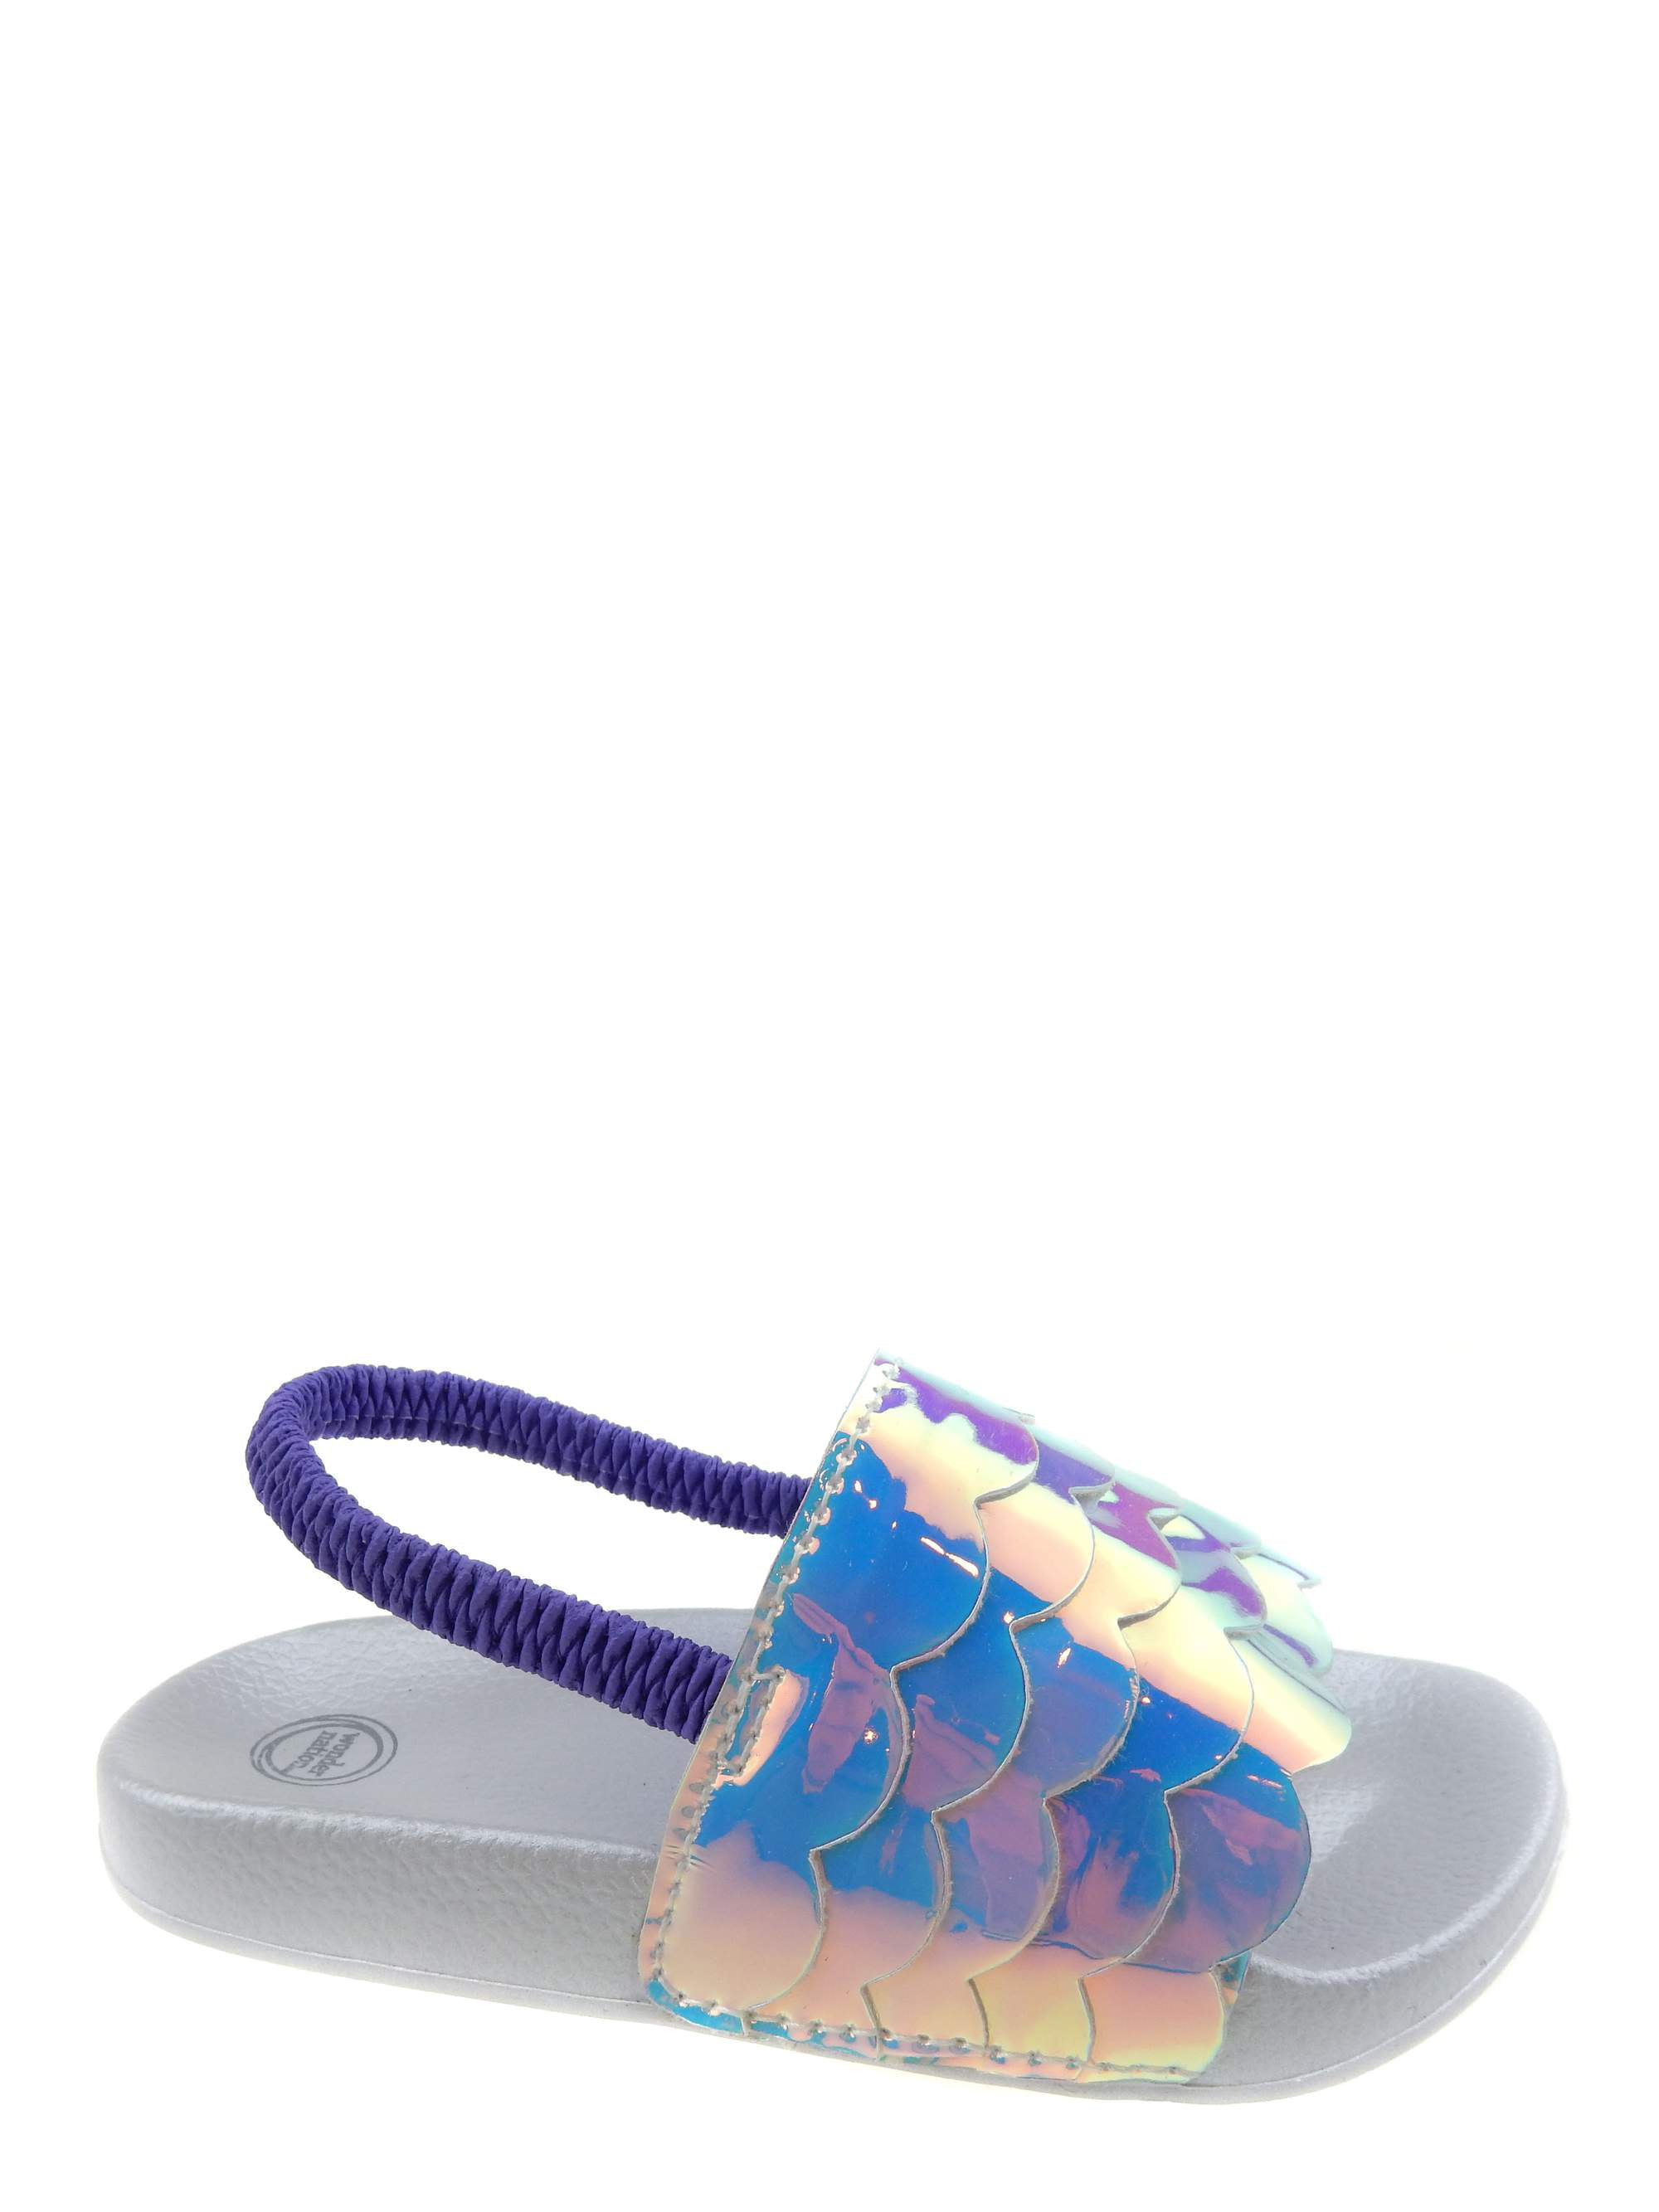 LIMITED TOO MERMAD SANDAL JELLY STARP TODDLER SZ 5/6 7/8 11/12 NEW NWT 